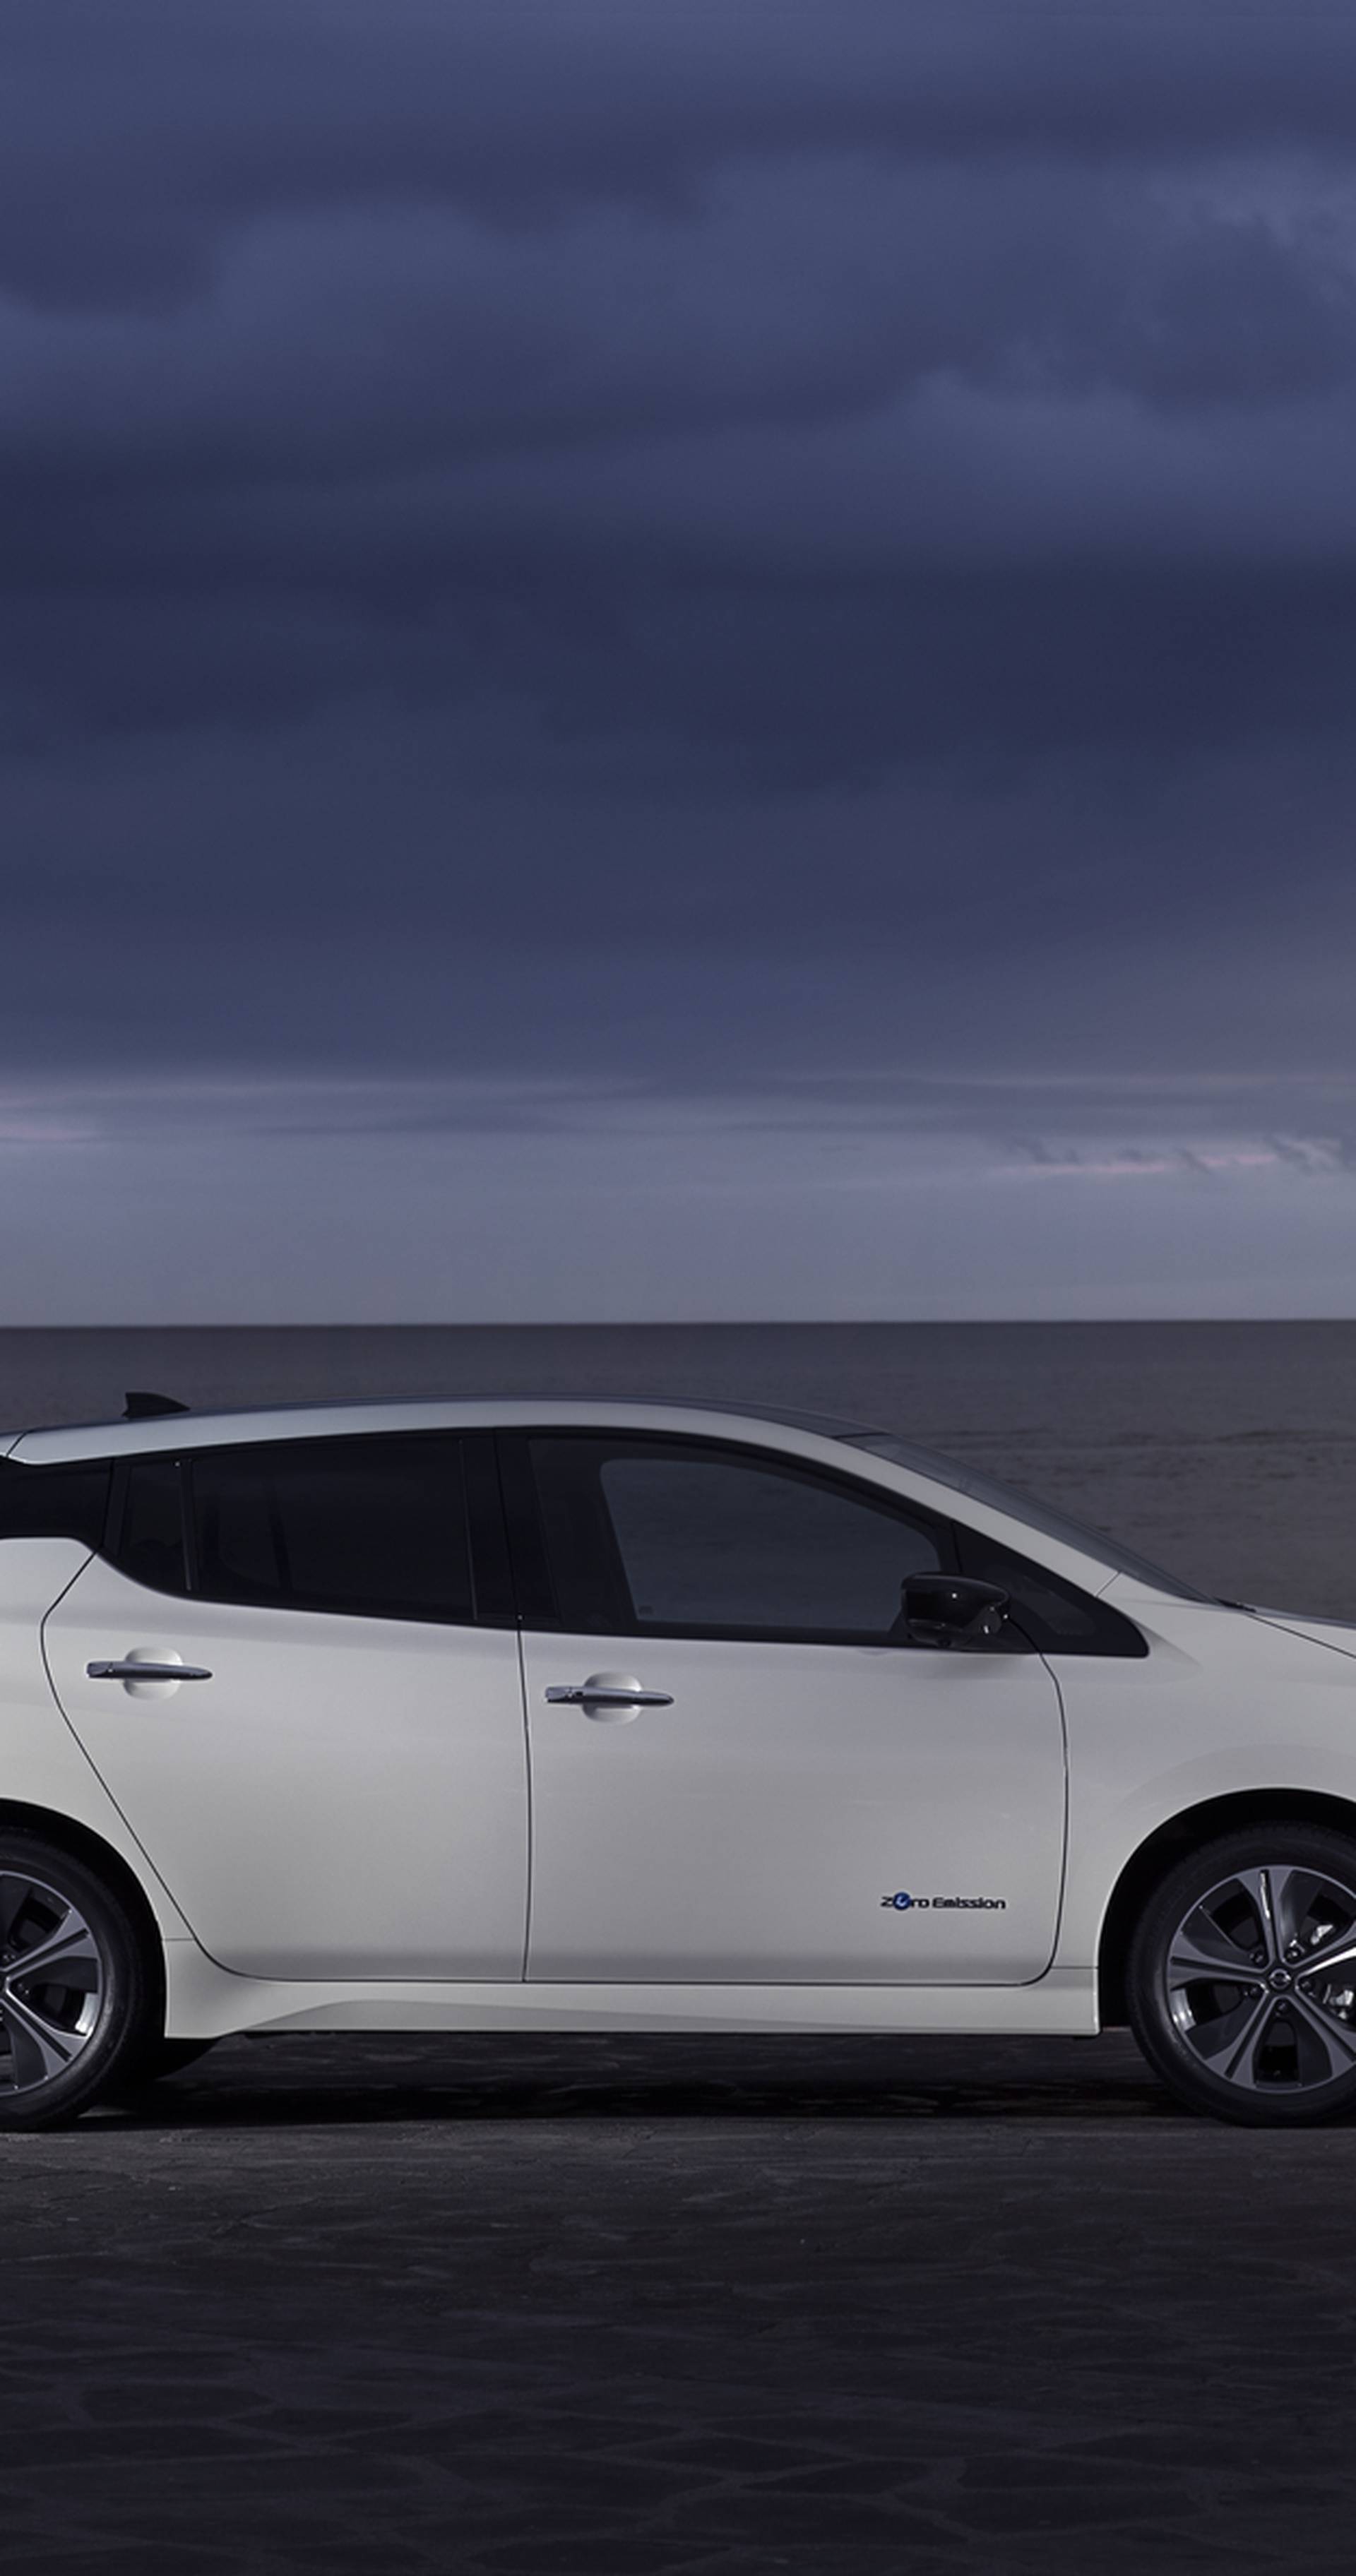 The new Nissan LEAF: the world's best-selling zero-emissions ele